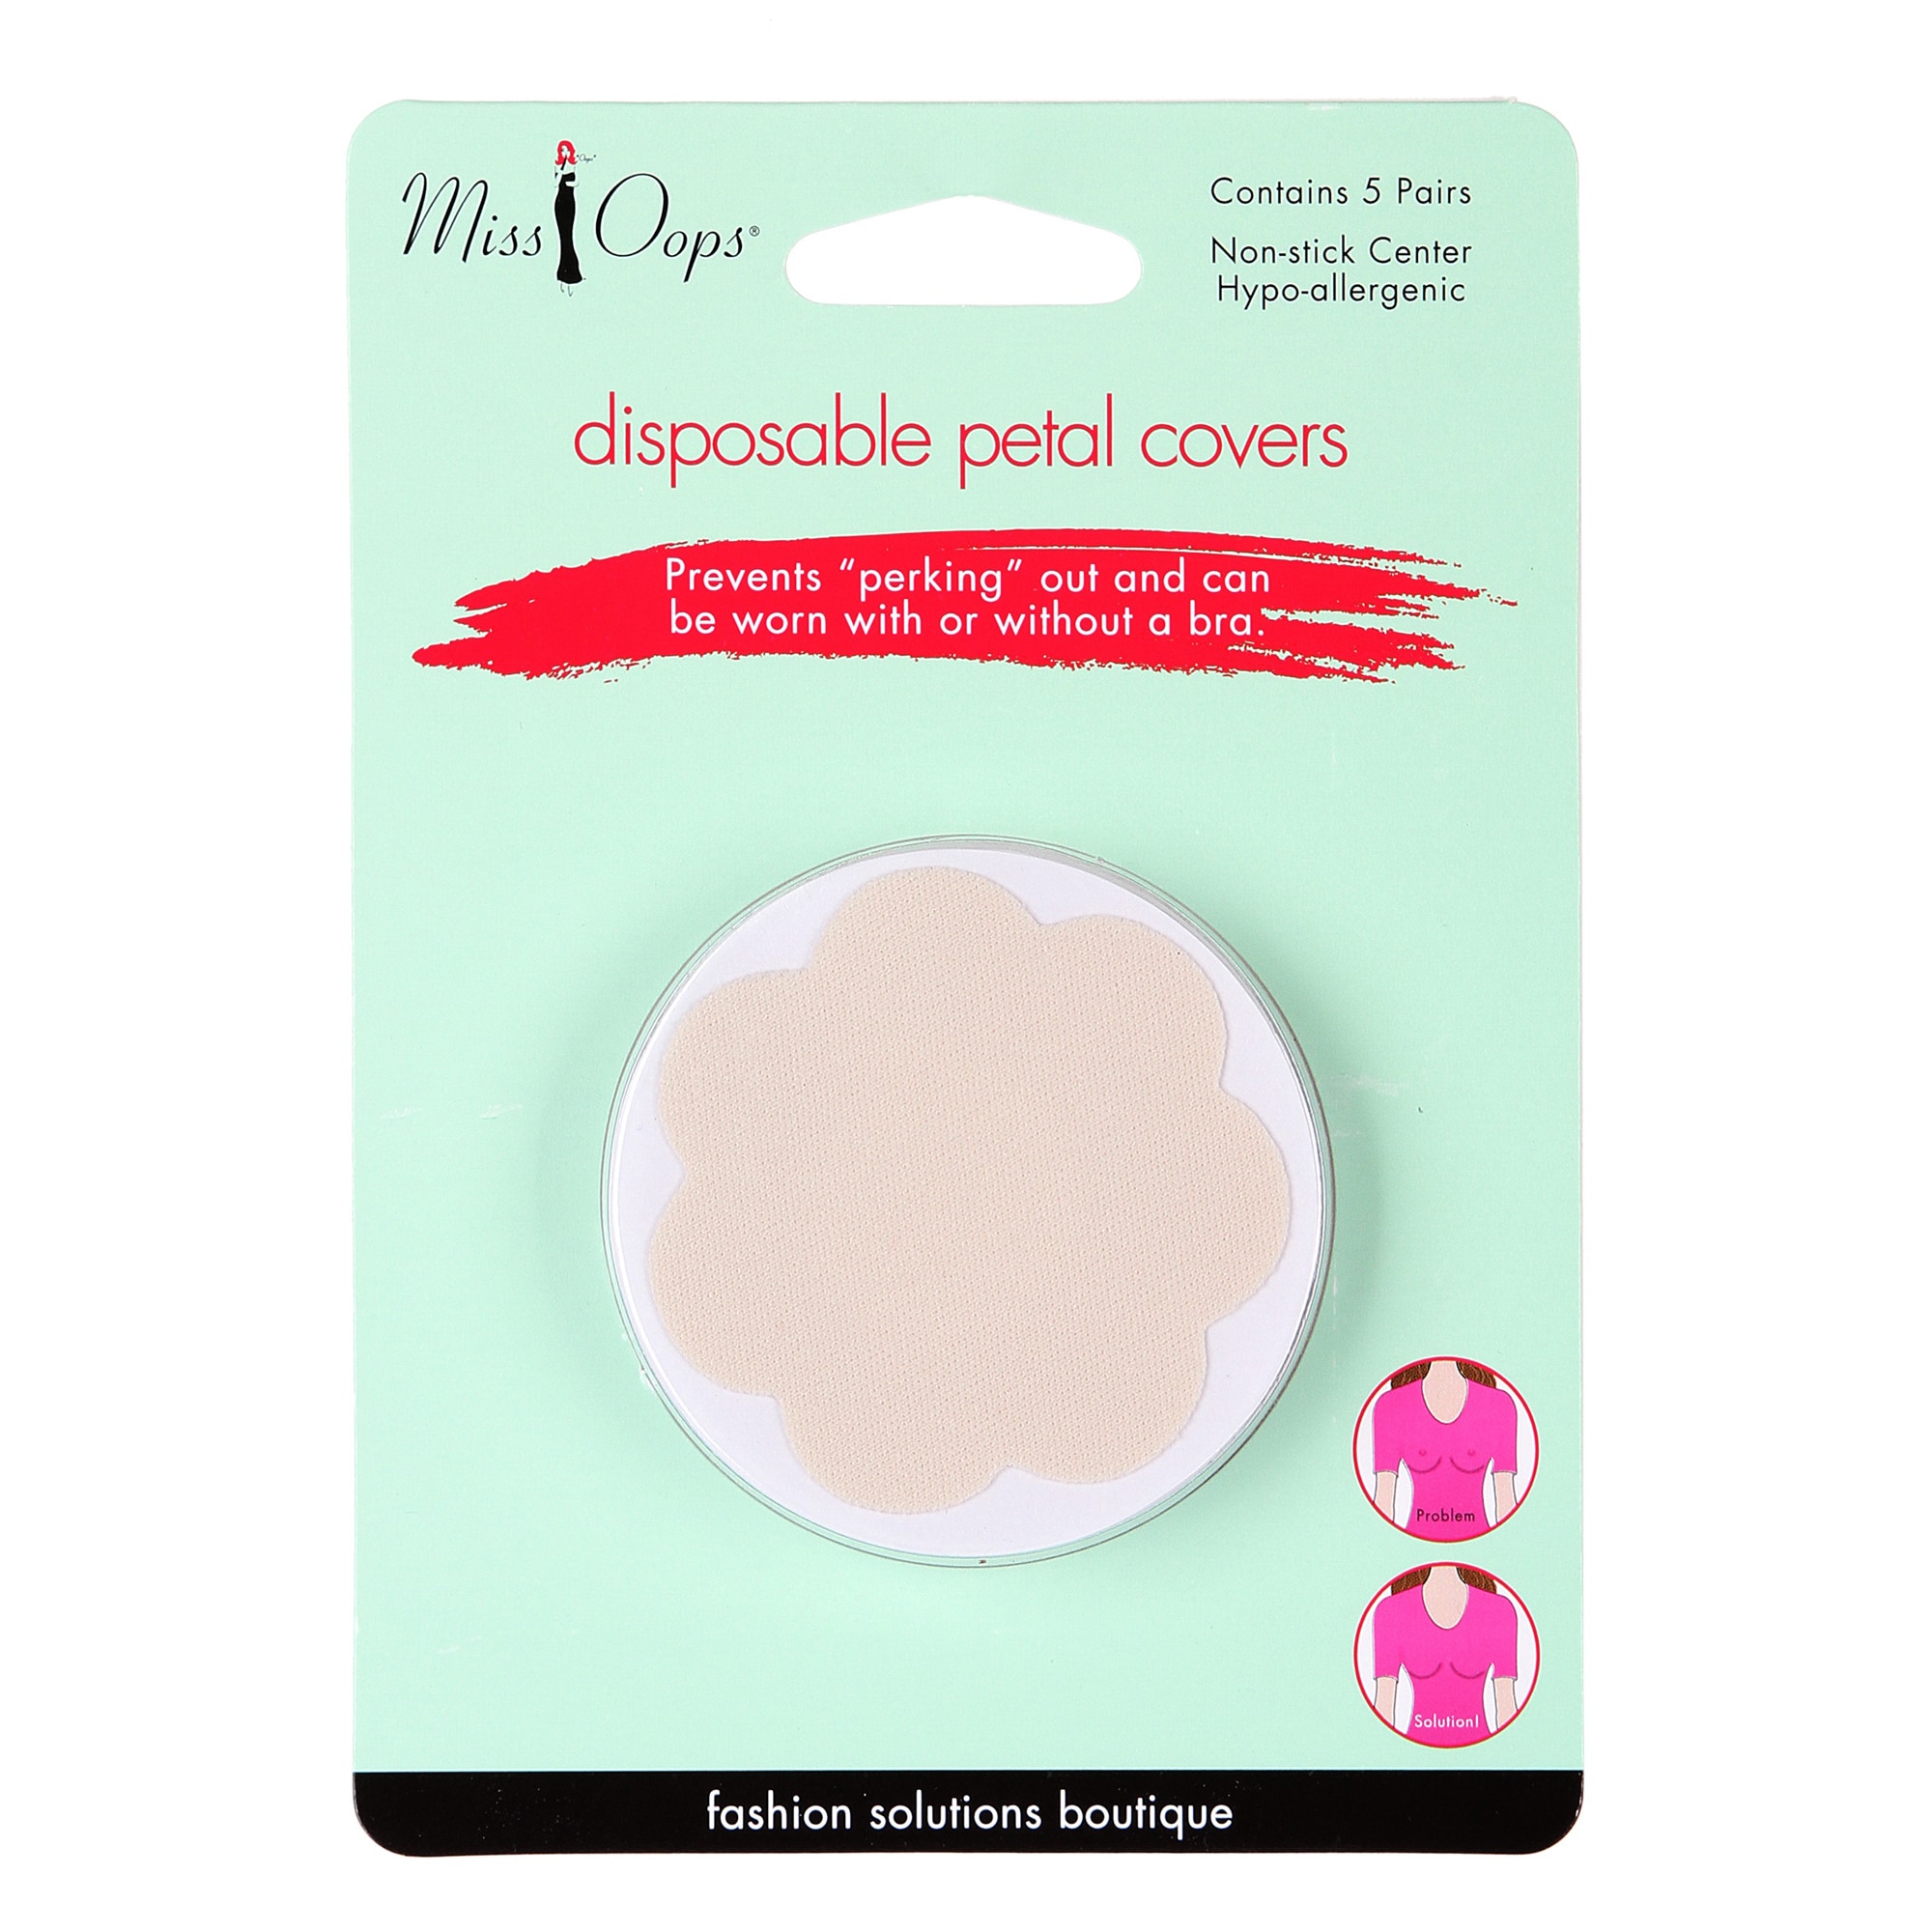 Miss Oops Disposable Petal Covers (10 Pair) (2.25 inches long x 2.25 inches wide Targeted area Breasts We cannot accept returns on this product.Due to manufacturer packaging changes, product packaging may vary from image shown. )